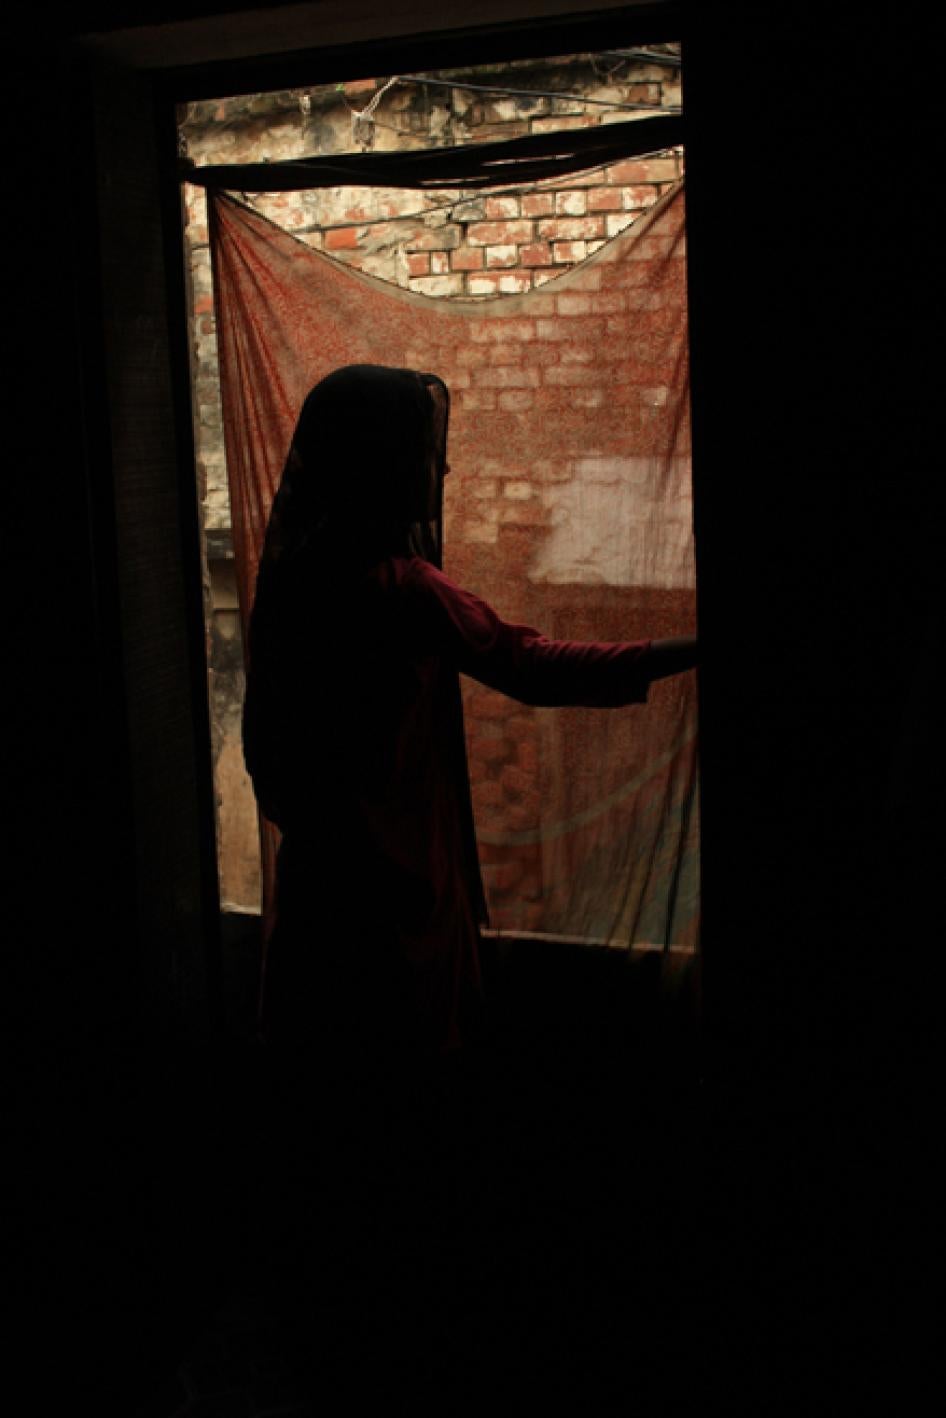 South Asia Failing to Address Its Child Rape Problem Human Rights Watch hq nude pic